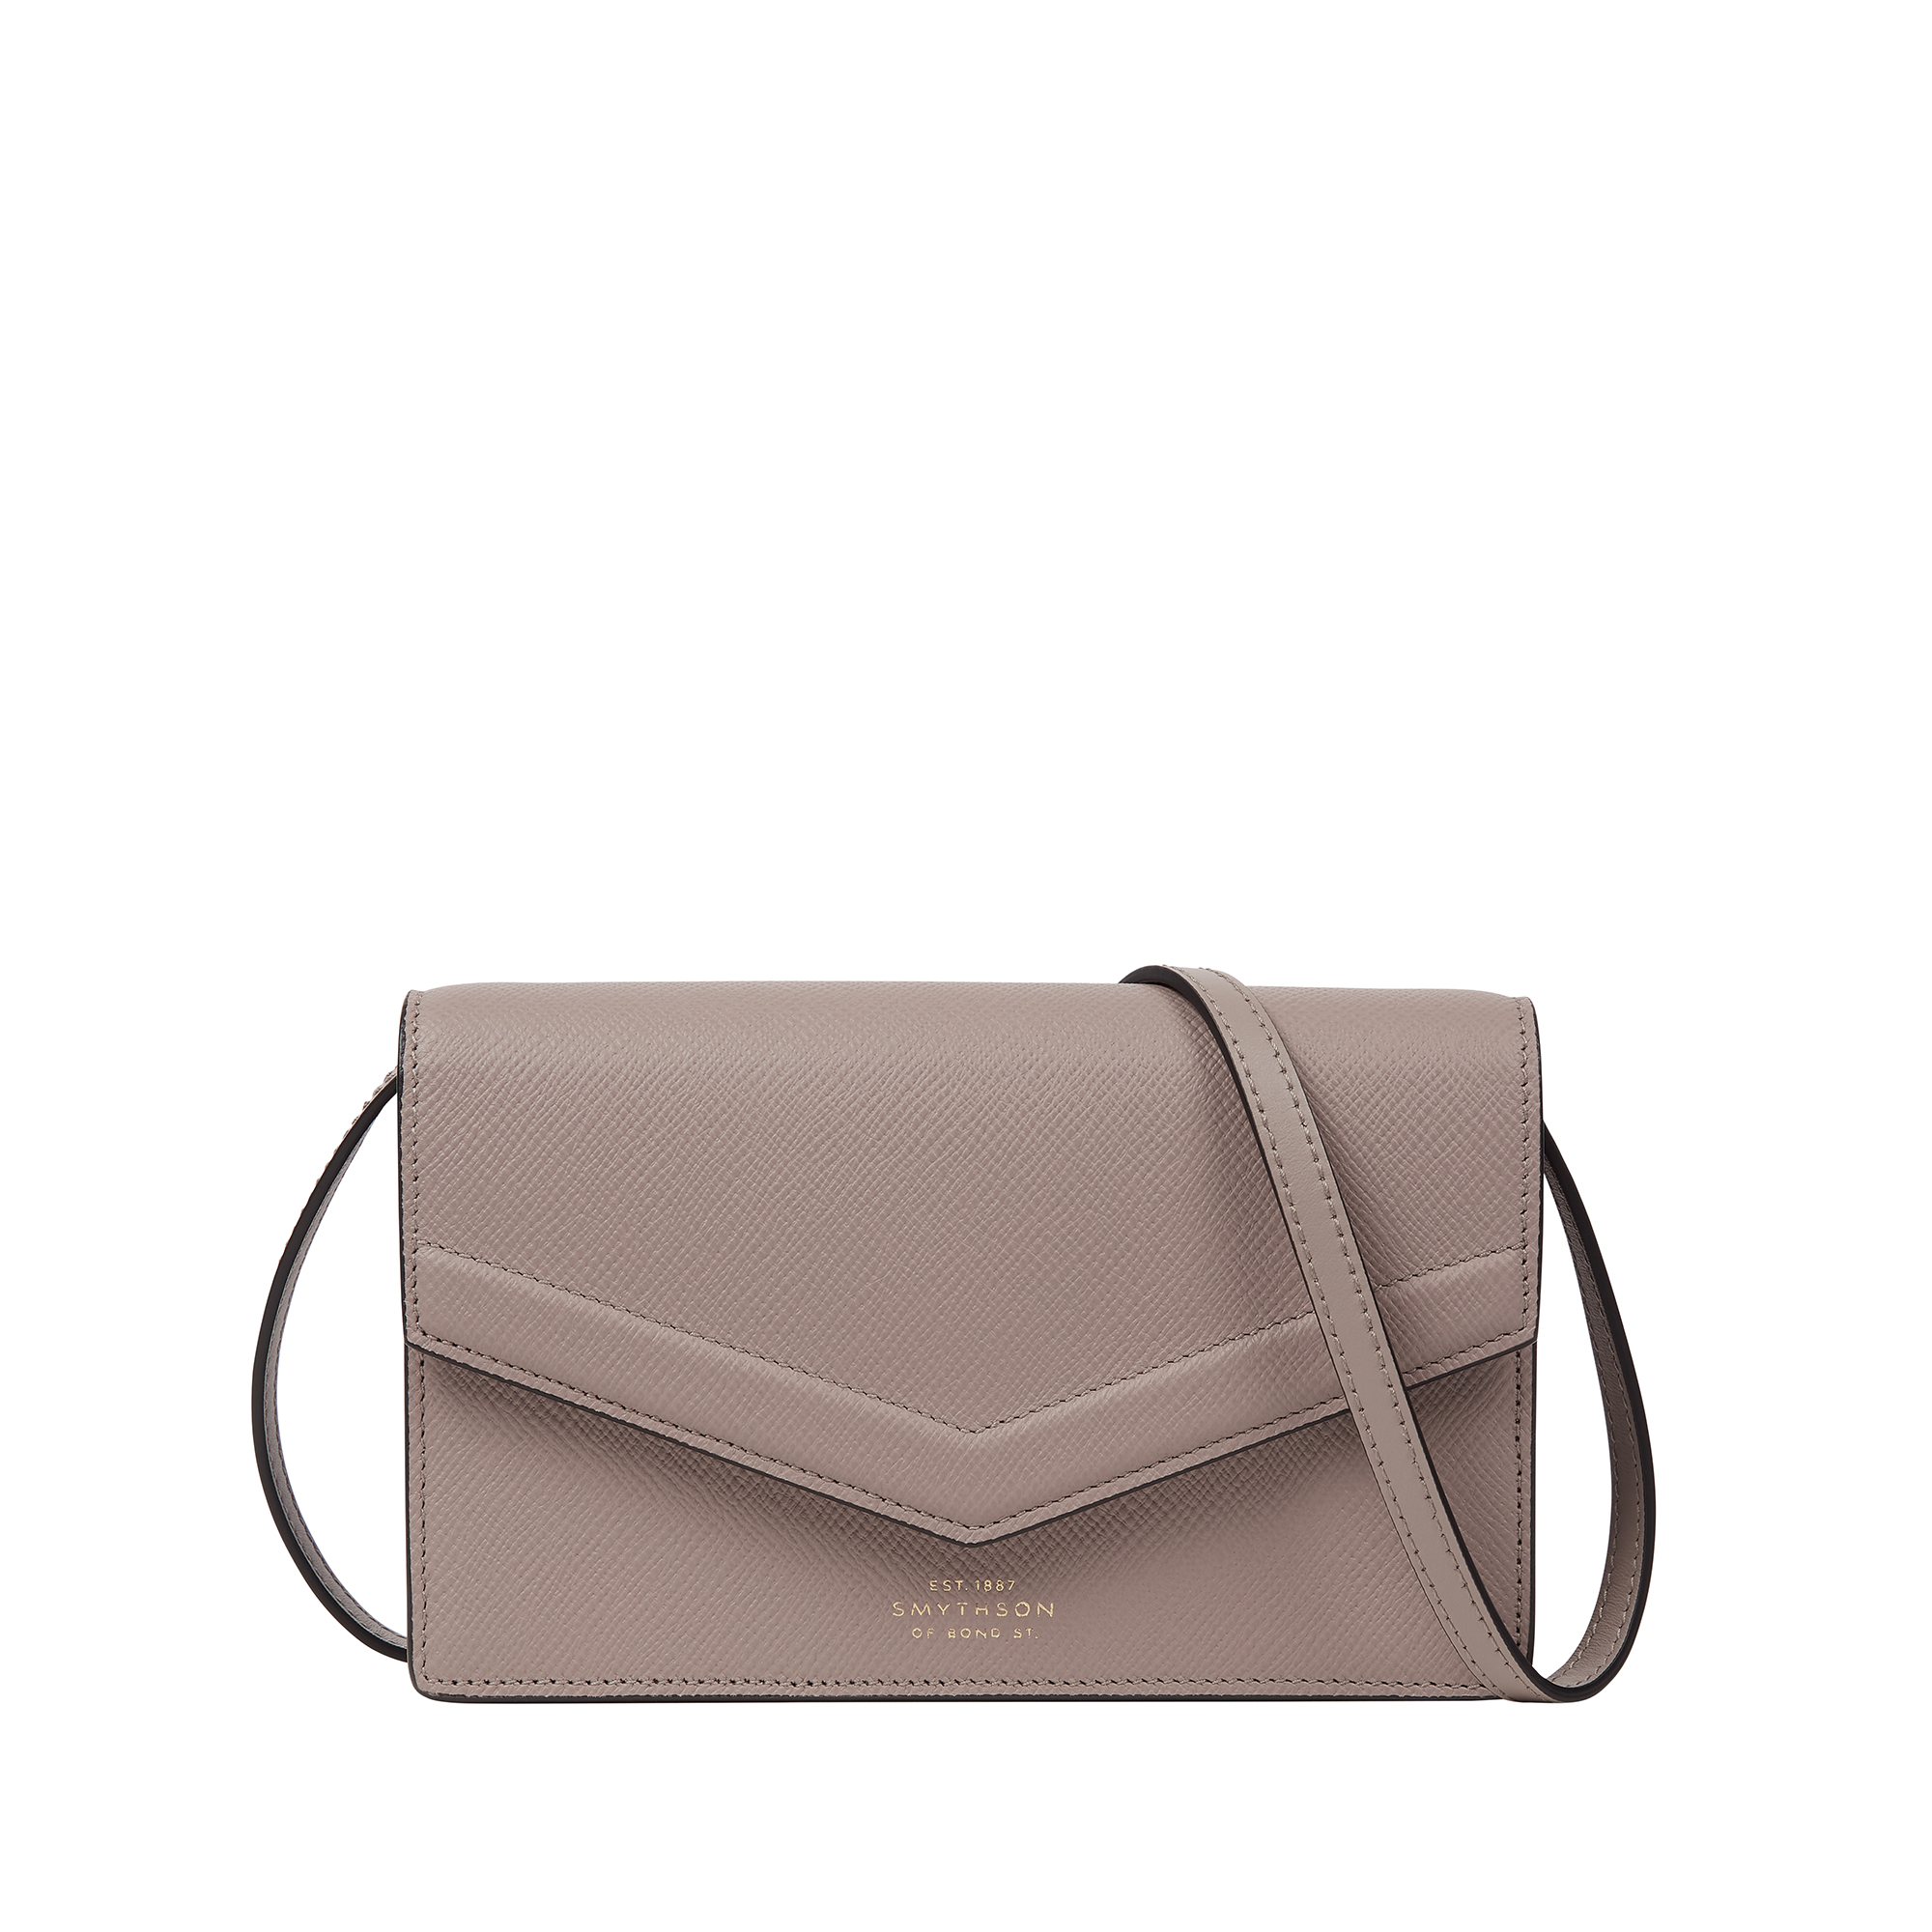 Smythson Envelope Purse Crossbody In Panama In Taupe